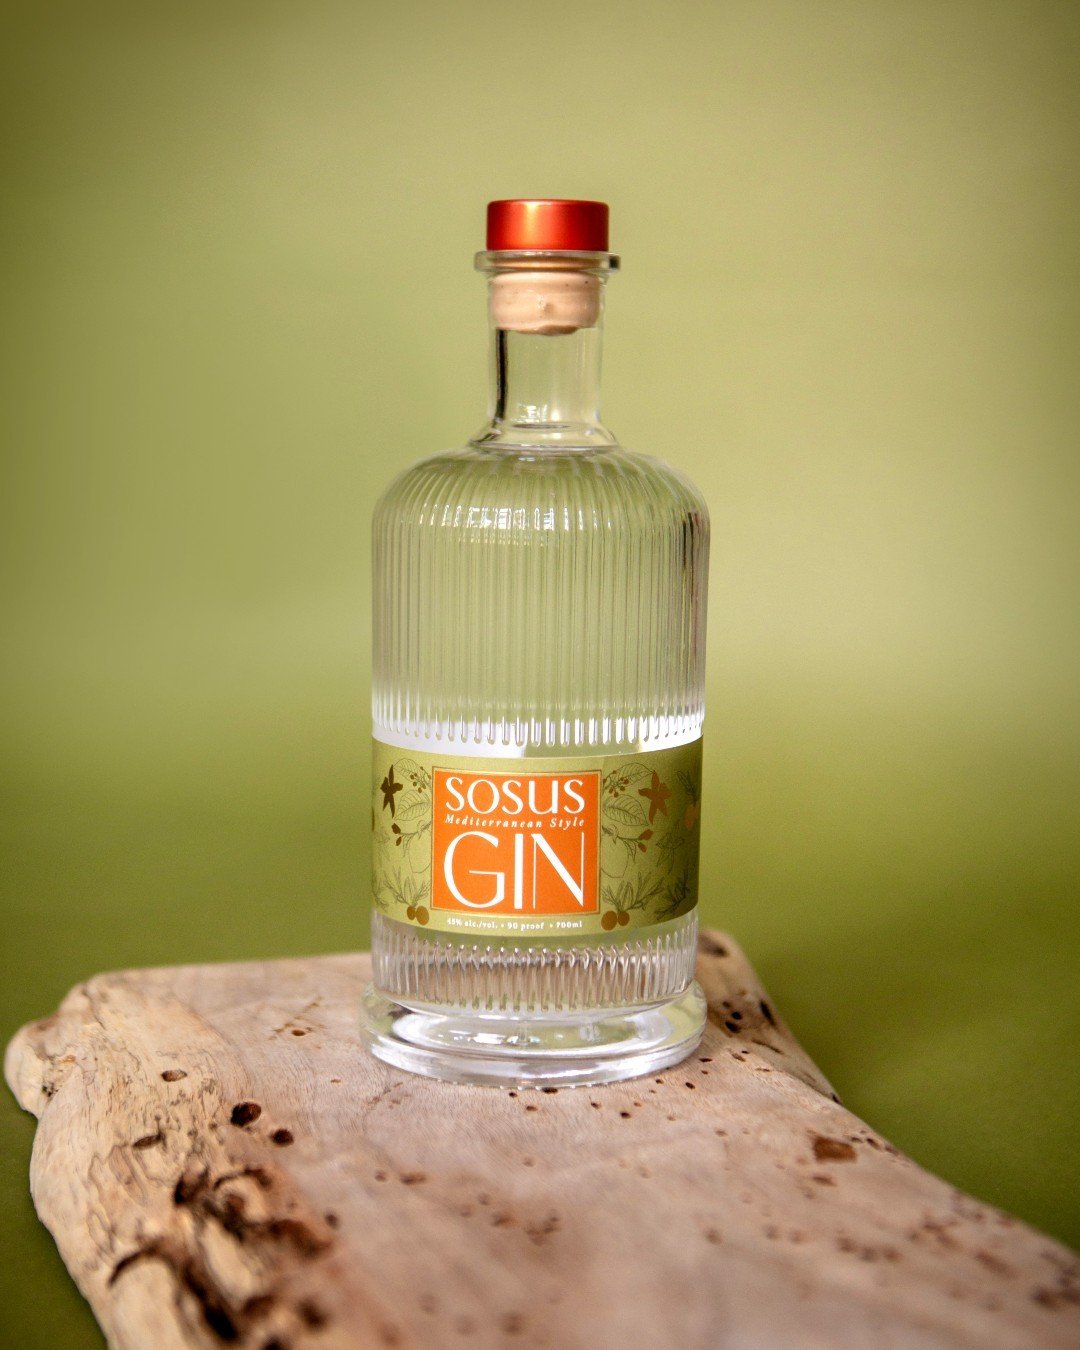 NOW INTRODUCING: Sosus Gin🍸 

This Mediterranean Style Gin is meticulously crafted with savory herbs and unique spices. Delicately balanced with layers of sage, rosemary and kalamata olive, further enhanced with almond and tarragon. A gin to whisk y